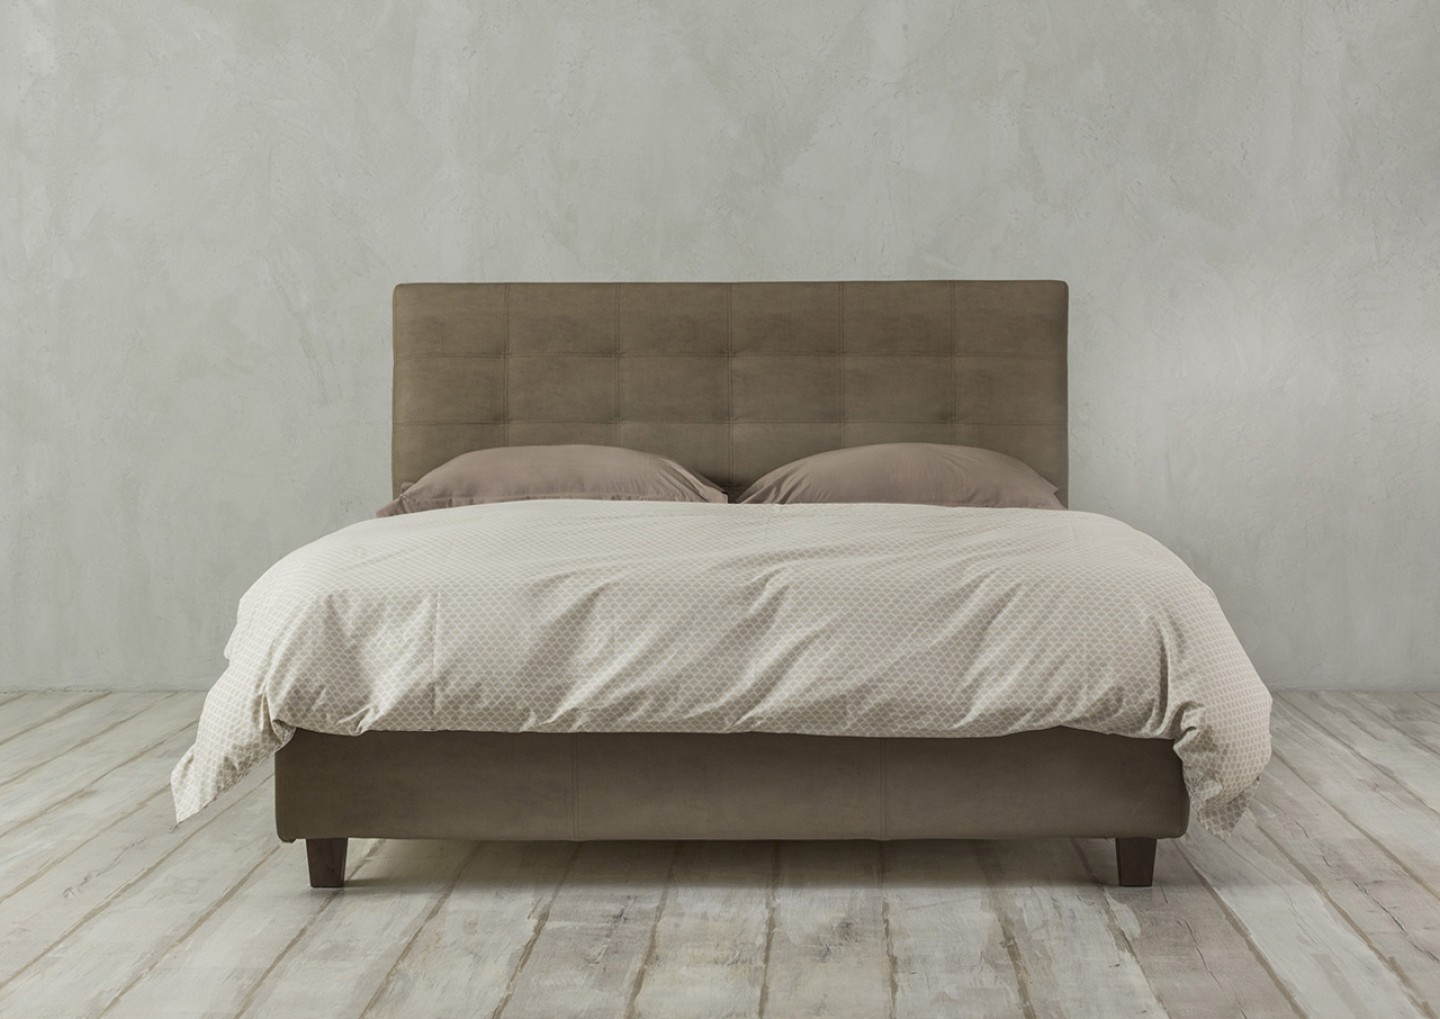 THE STUNNING BED by Elite Strom